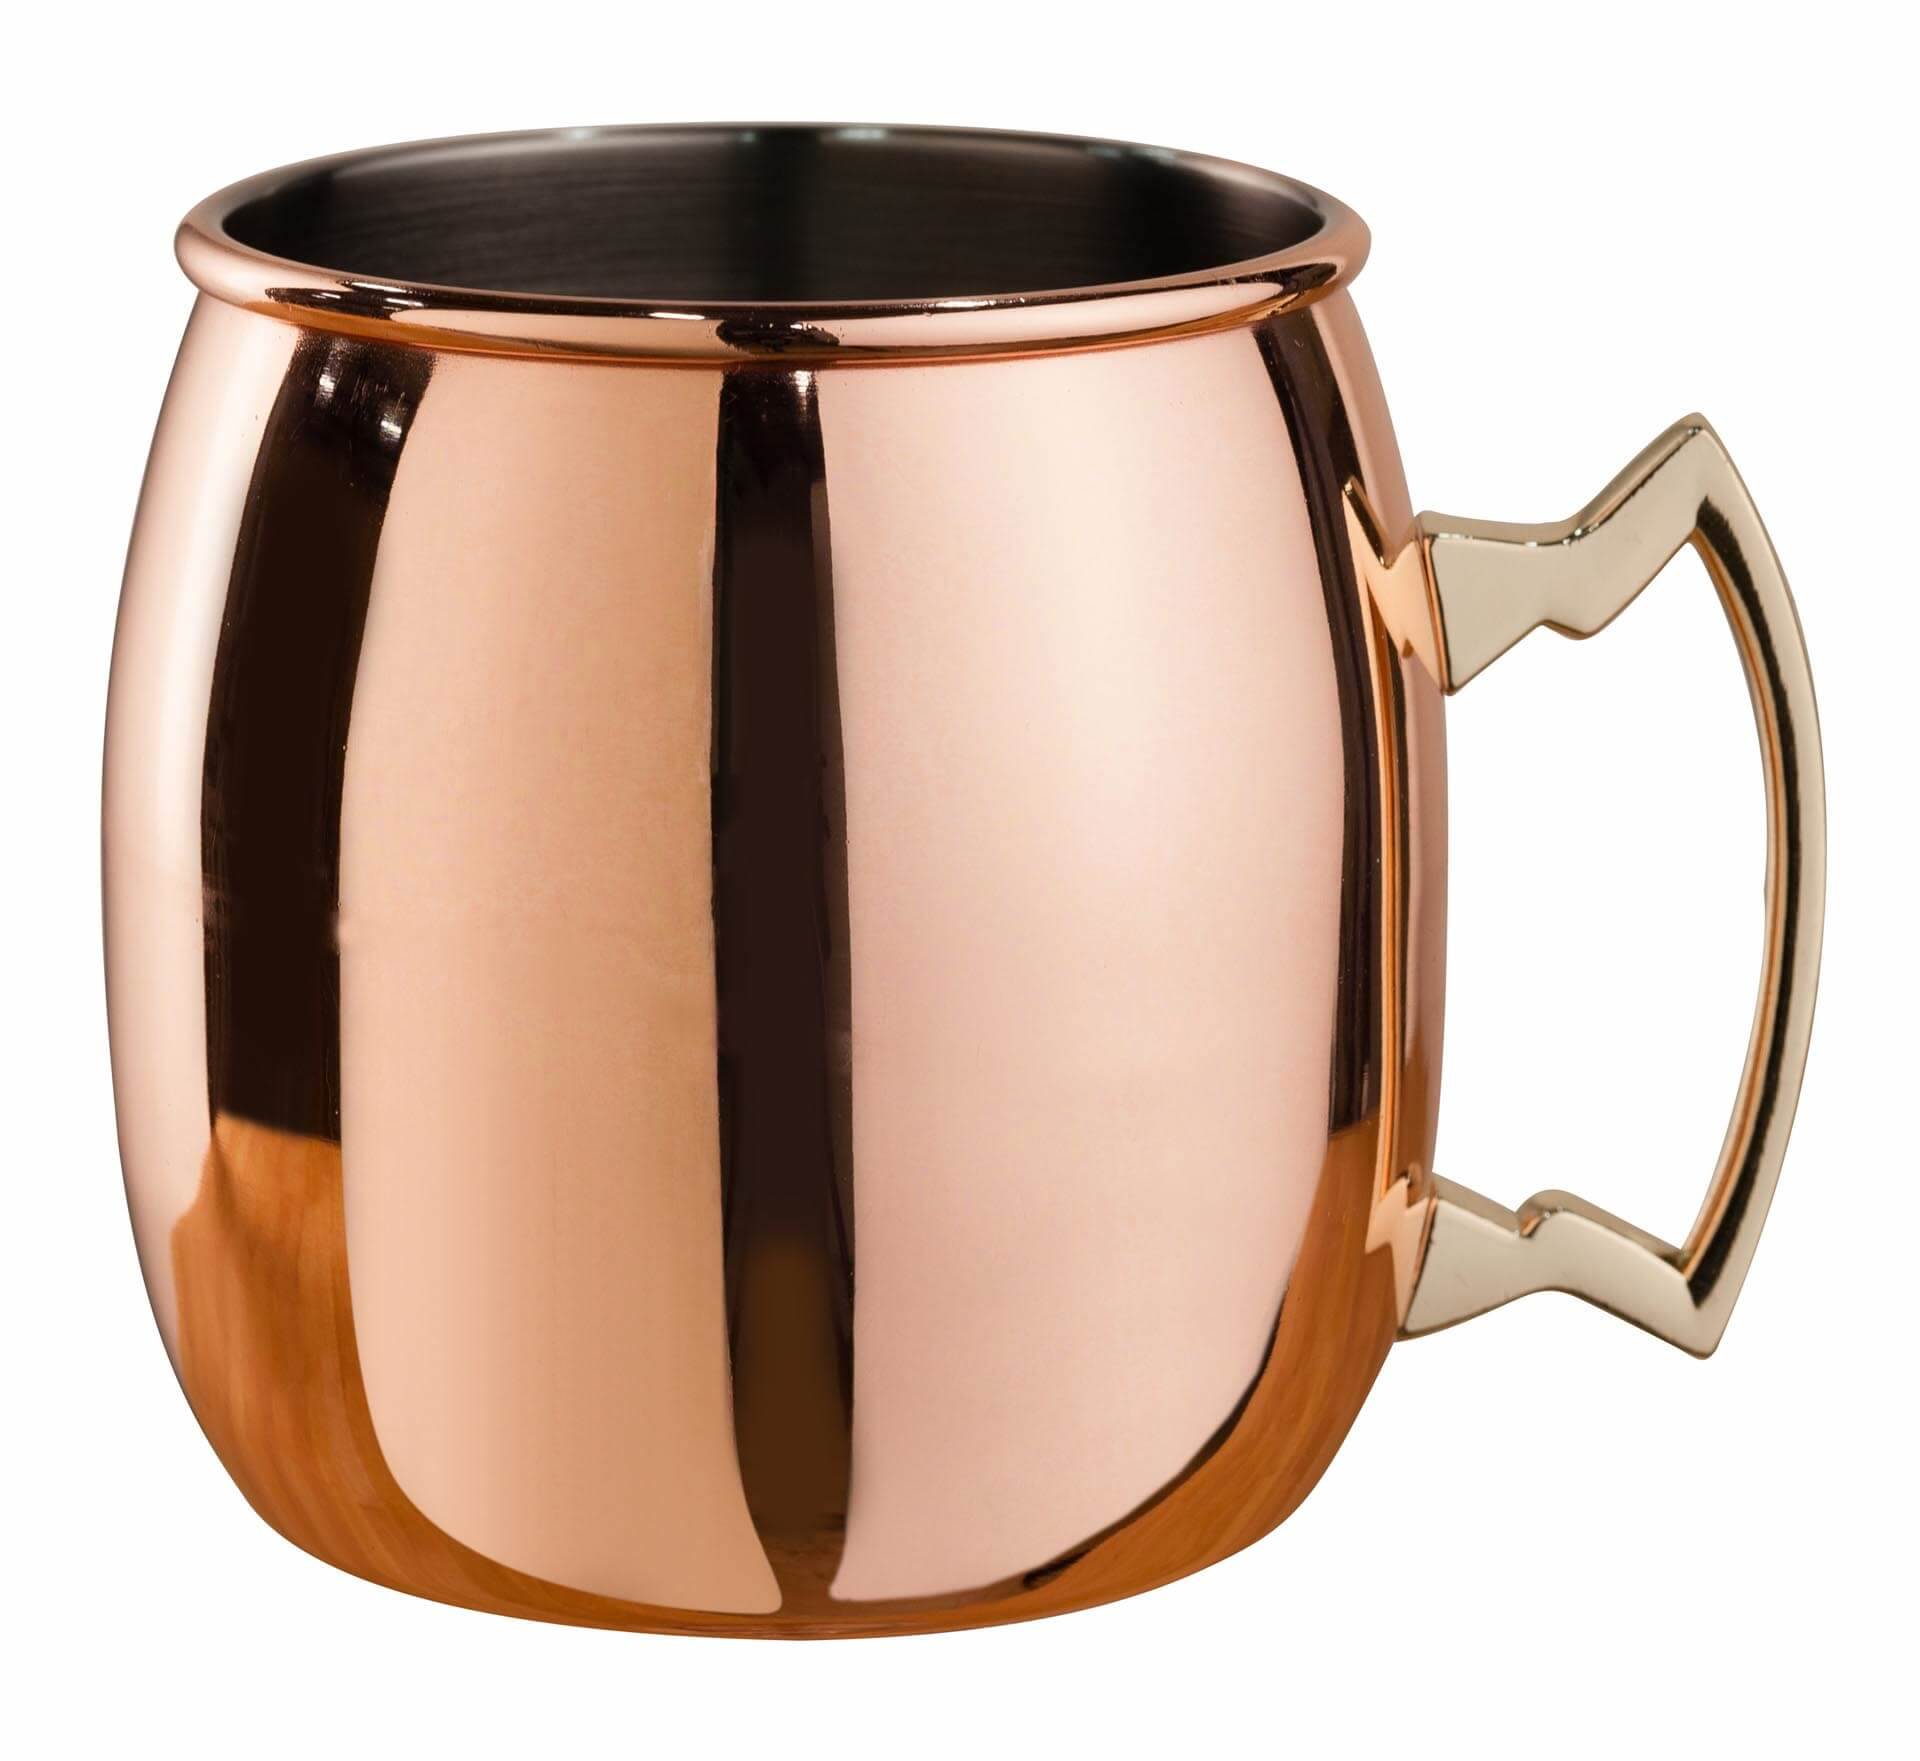 BEAUMONT MEZCLAR 500ml CURVED MOSCOW MULE MUG - COPPER PLATED. BAR-3667